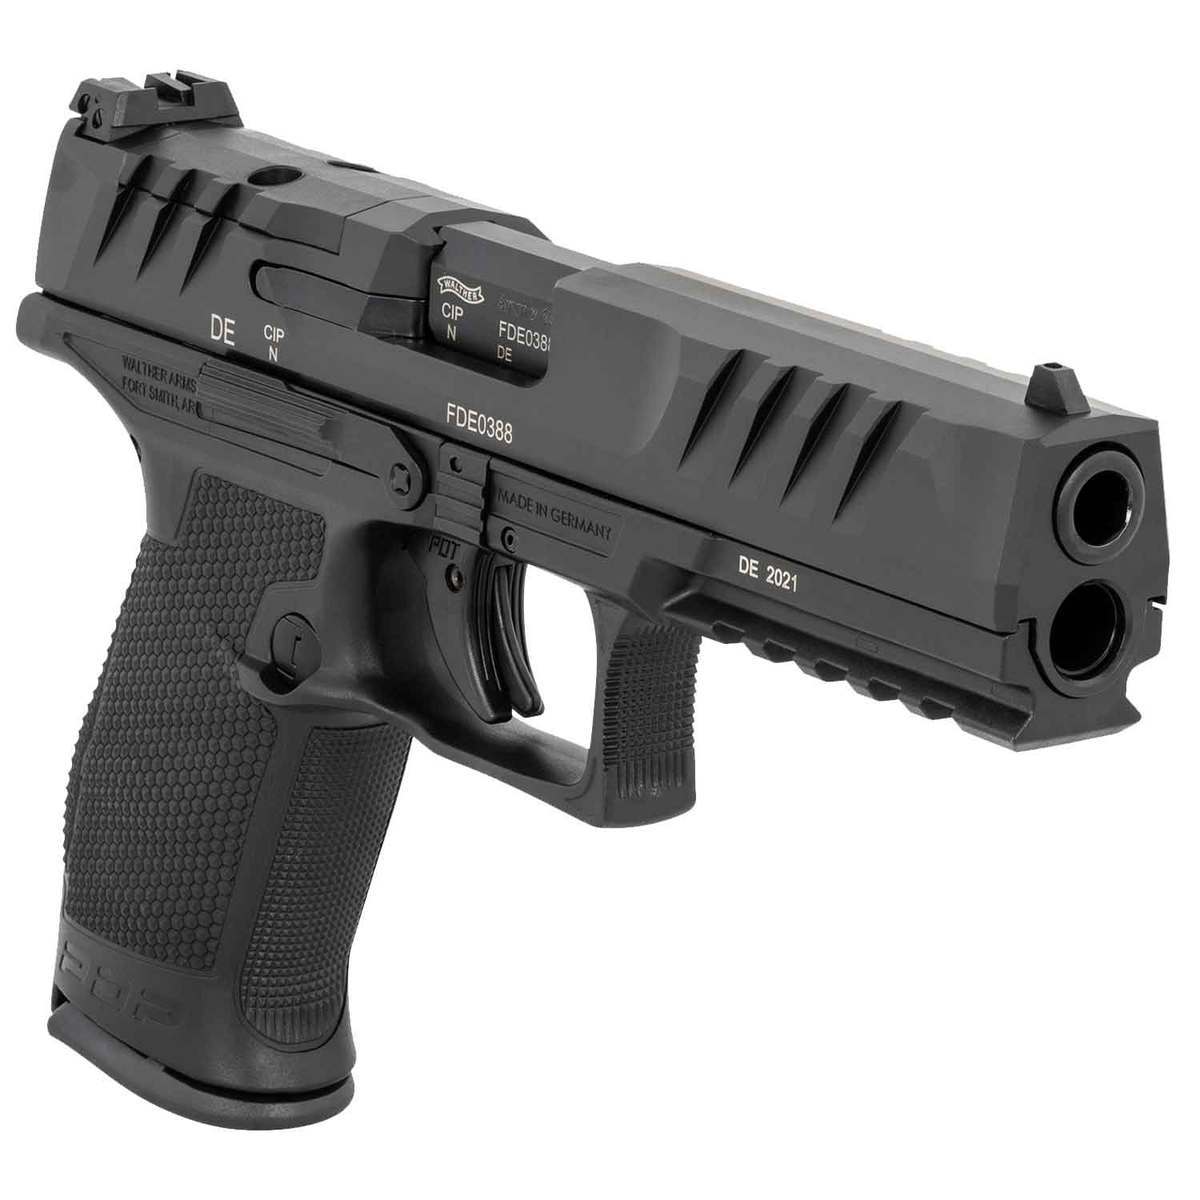 Walther PDP Compact Optics Ready Semi-Automatic Pistol In Stock | Don't Miss Out, Buy Now! - Alligator Arms